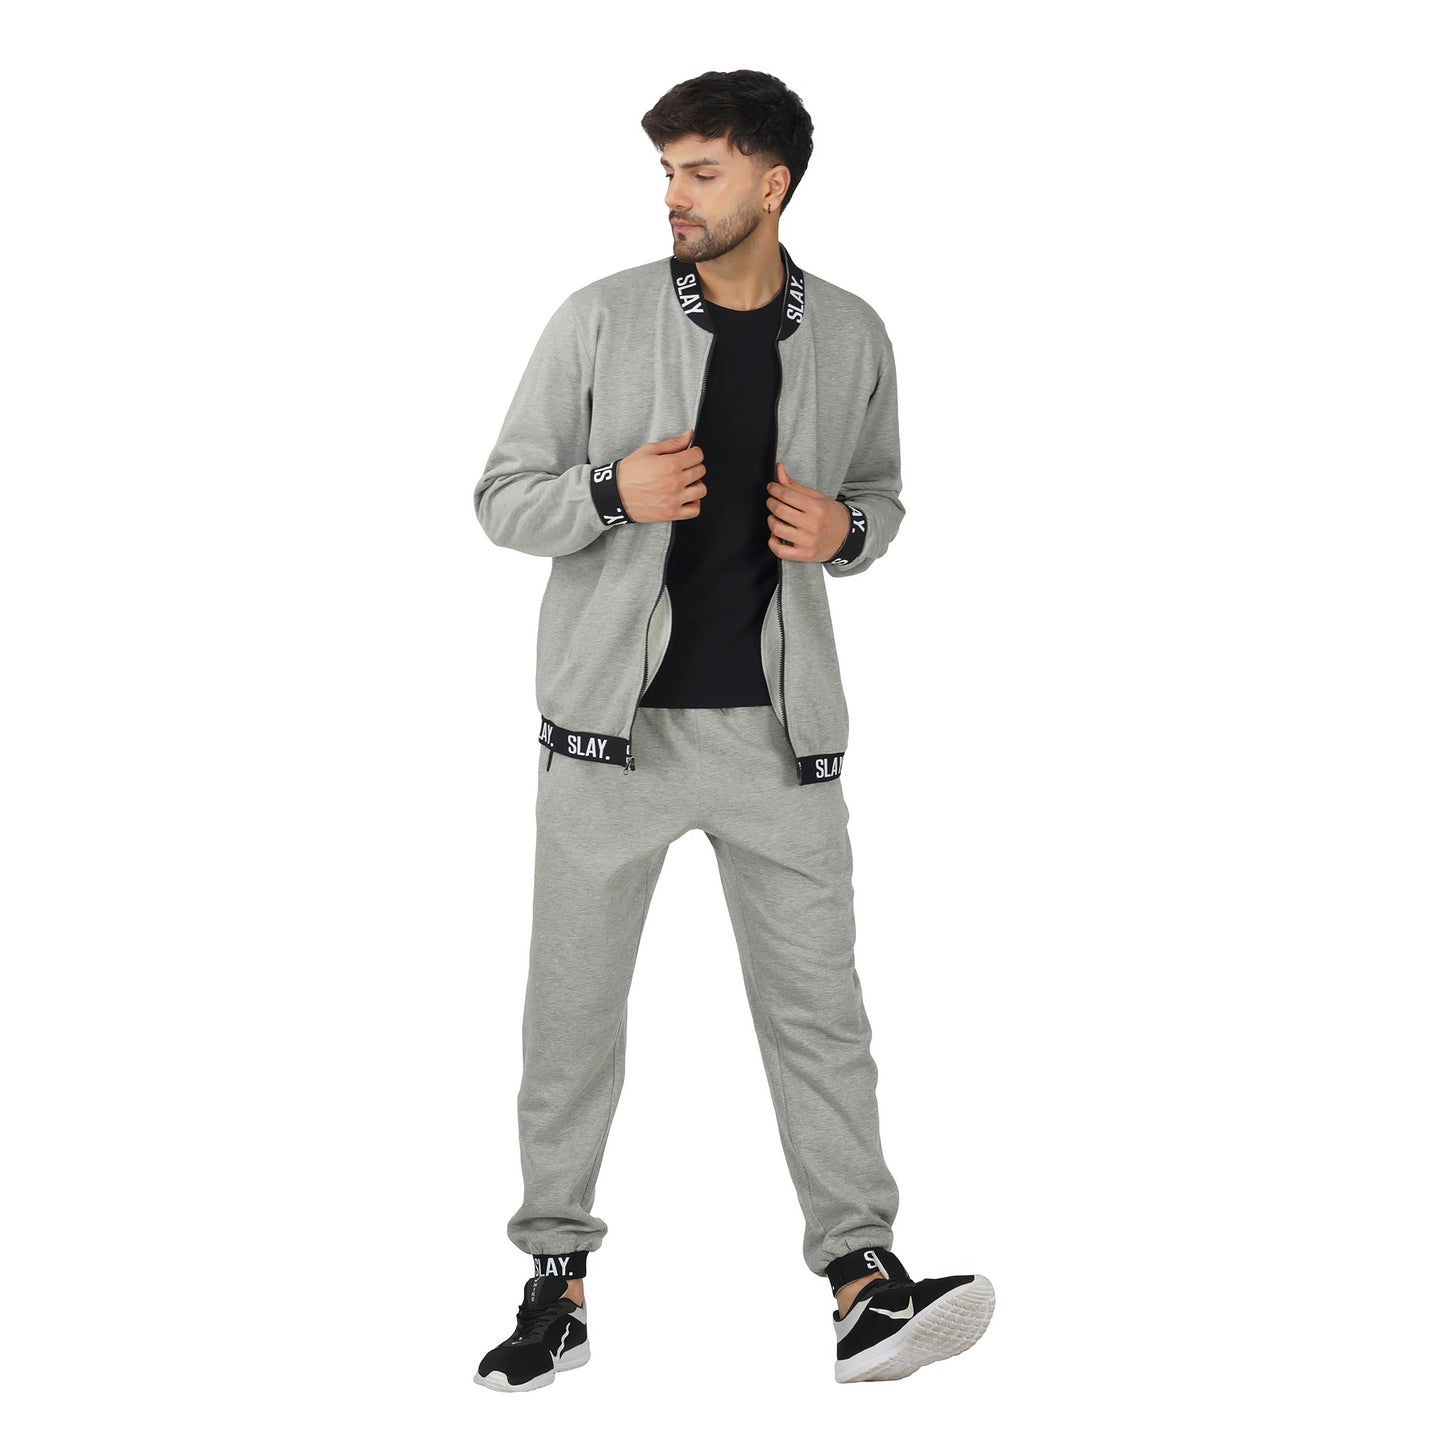 SLAY. Classic Men's Limited Edition Grey Tracksuit